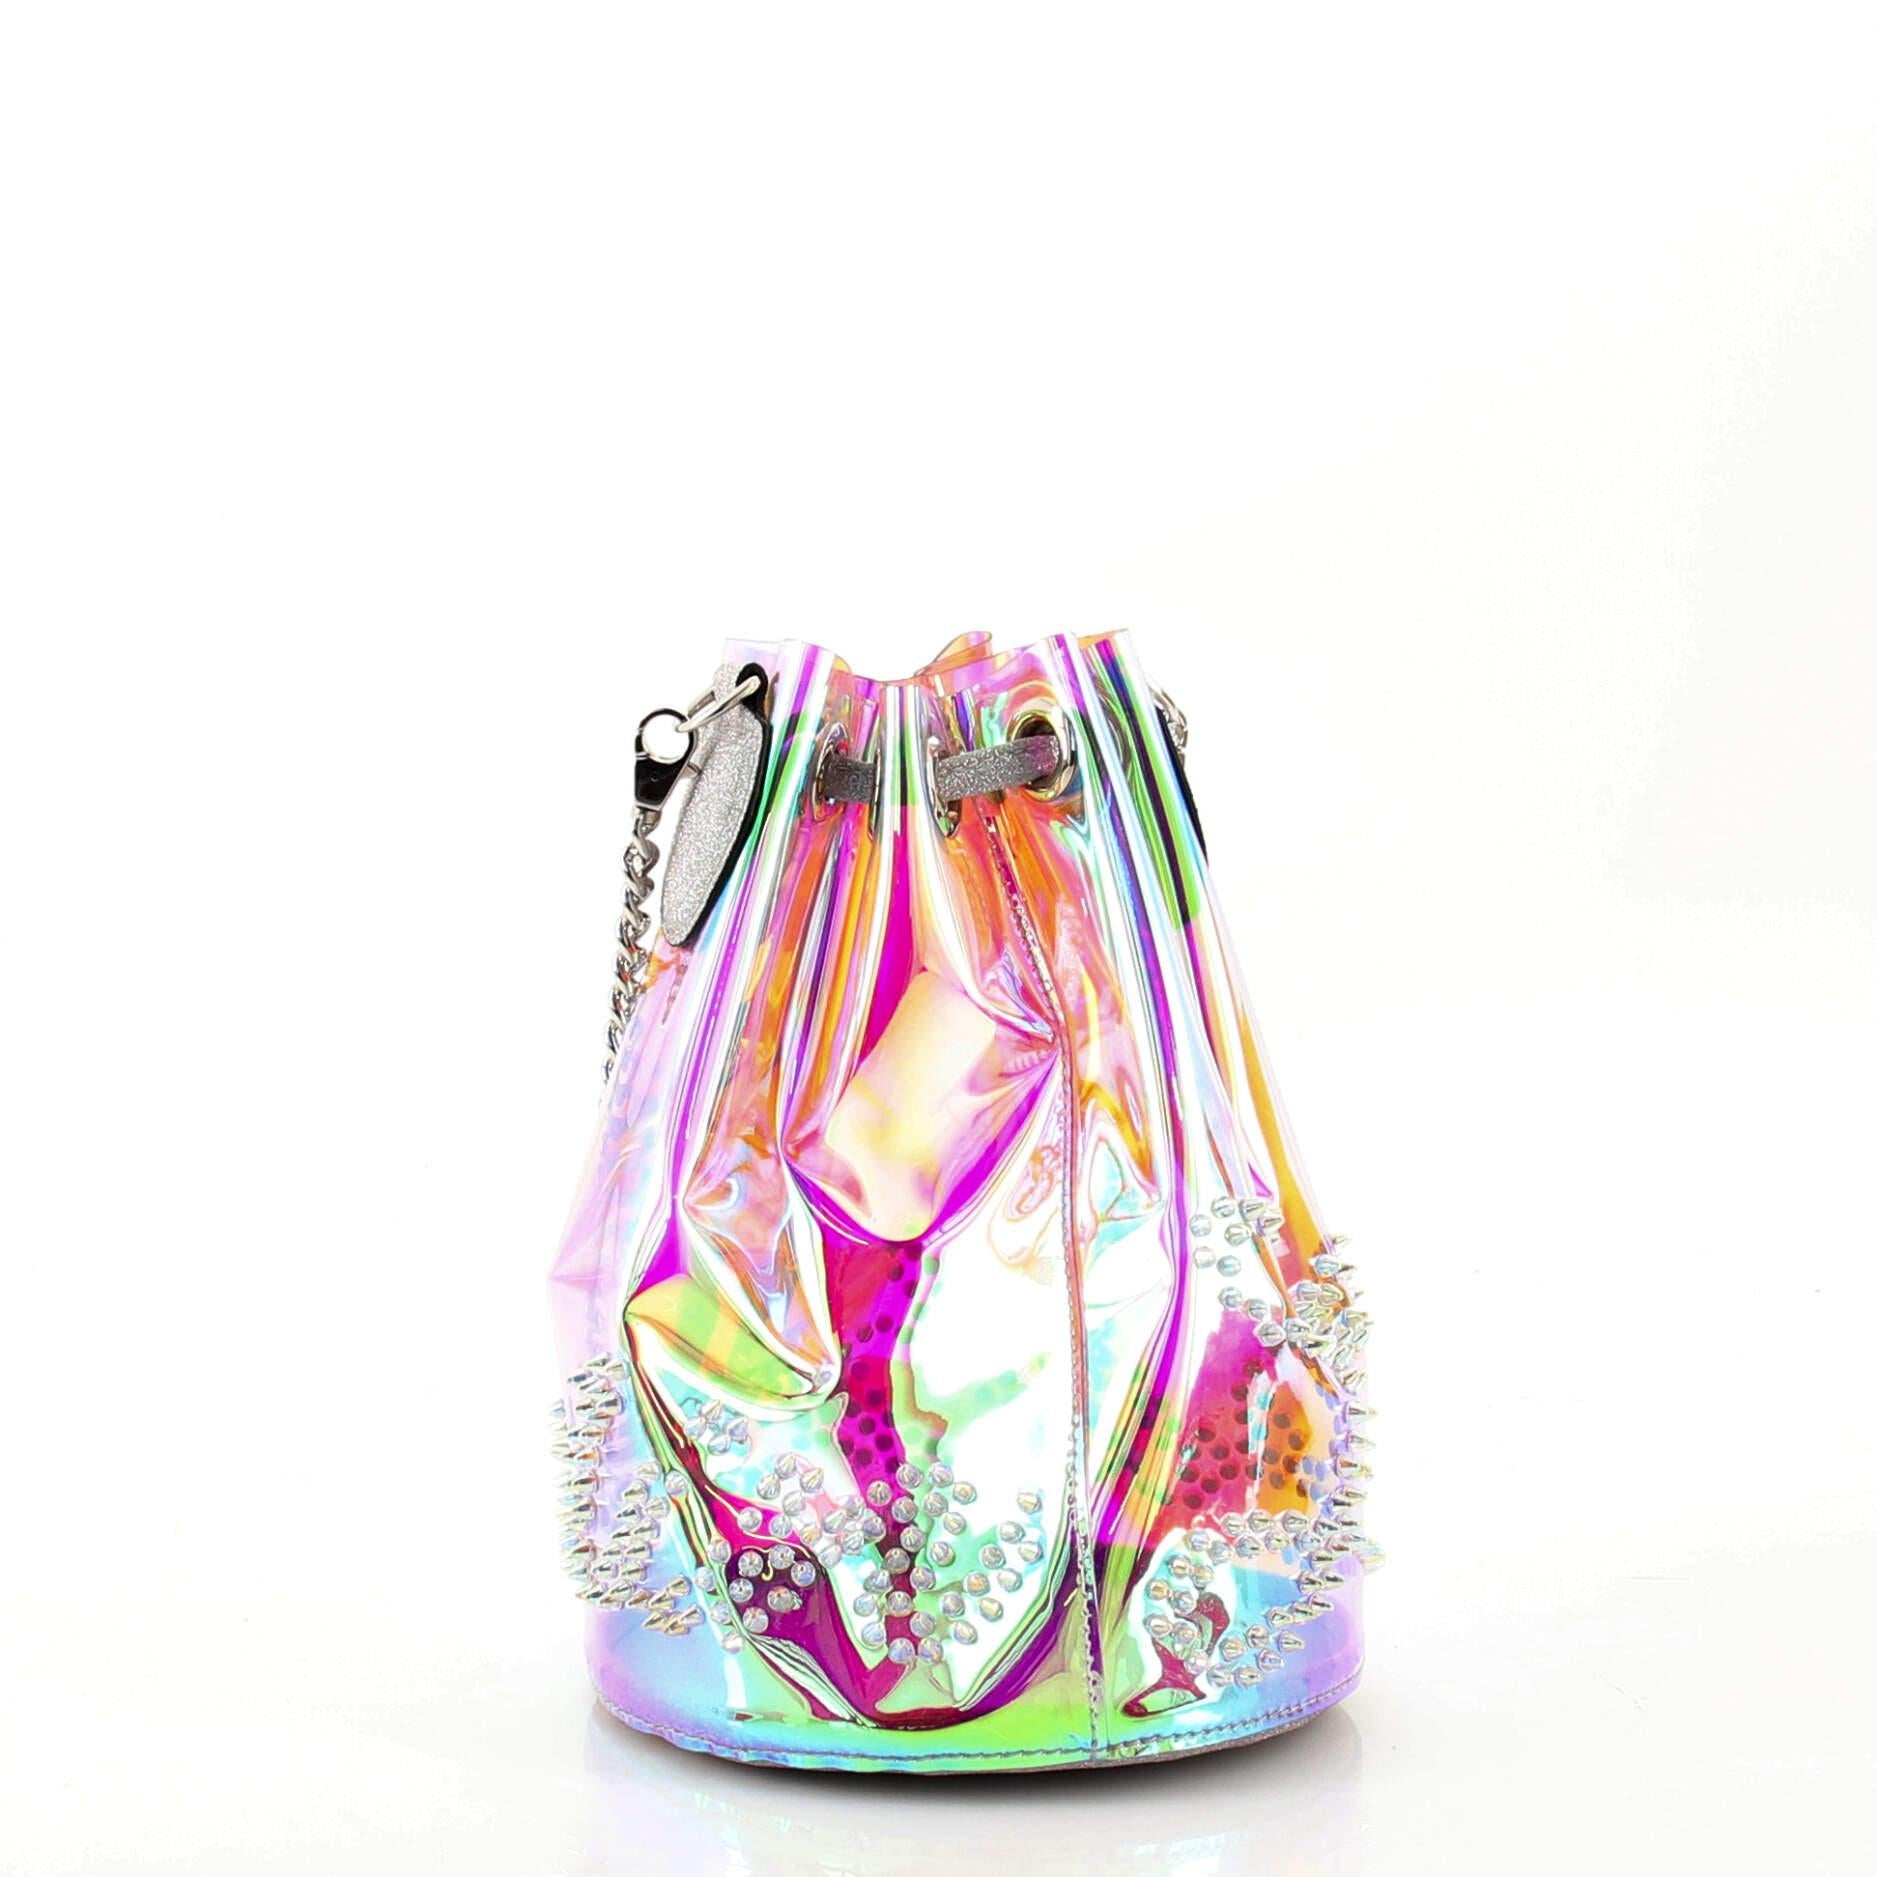 Gray Christian Louboutin Marie Jane Bucket Bag Spiked Holographic PVC